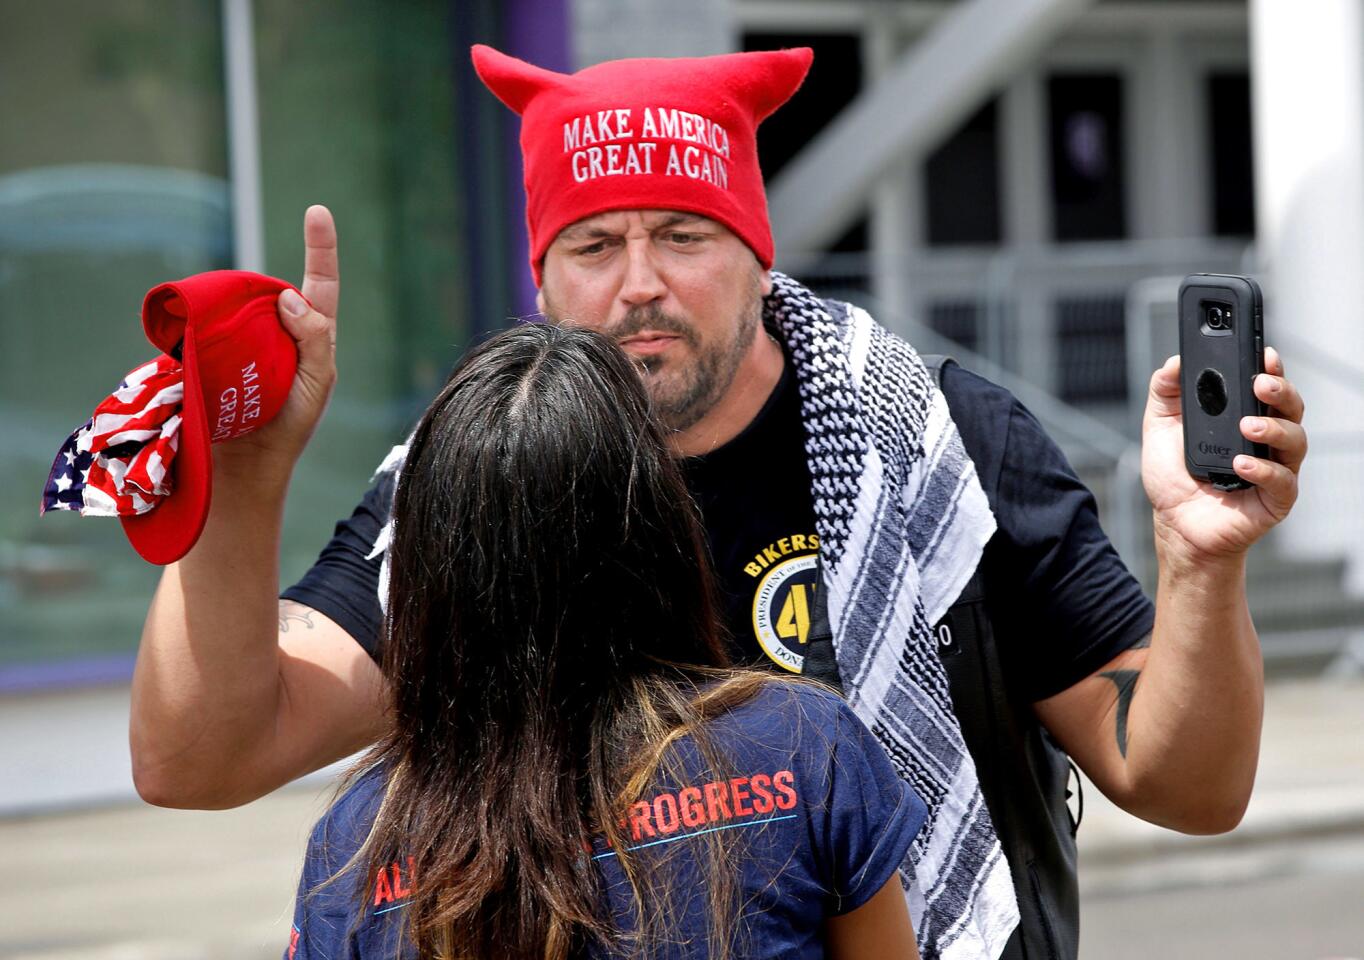 A Trump supporter faces off with a protester in Orlando.